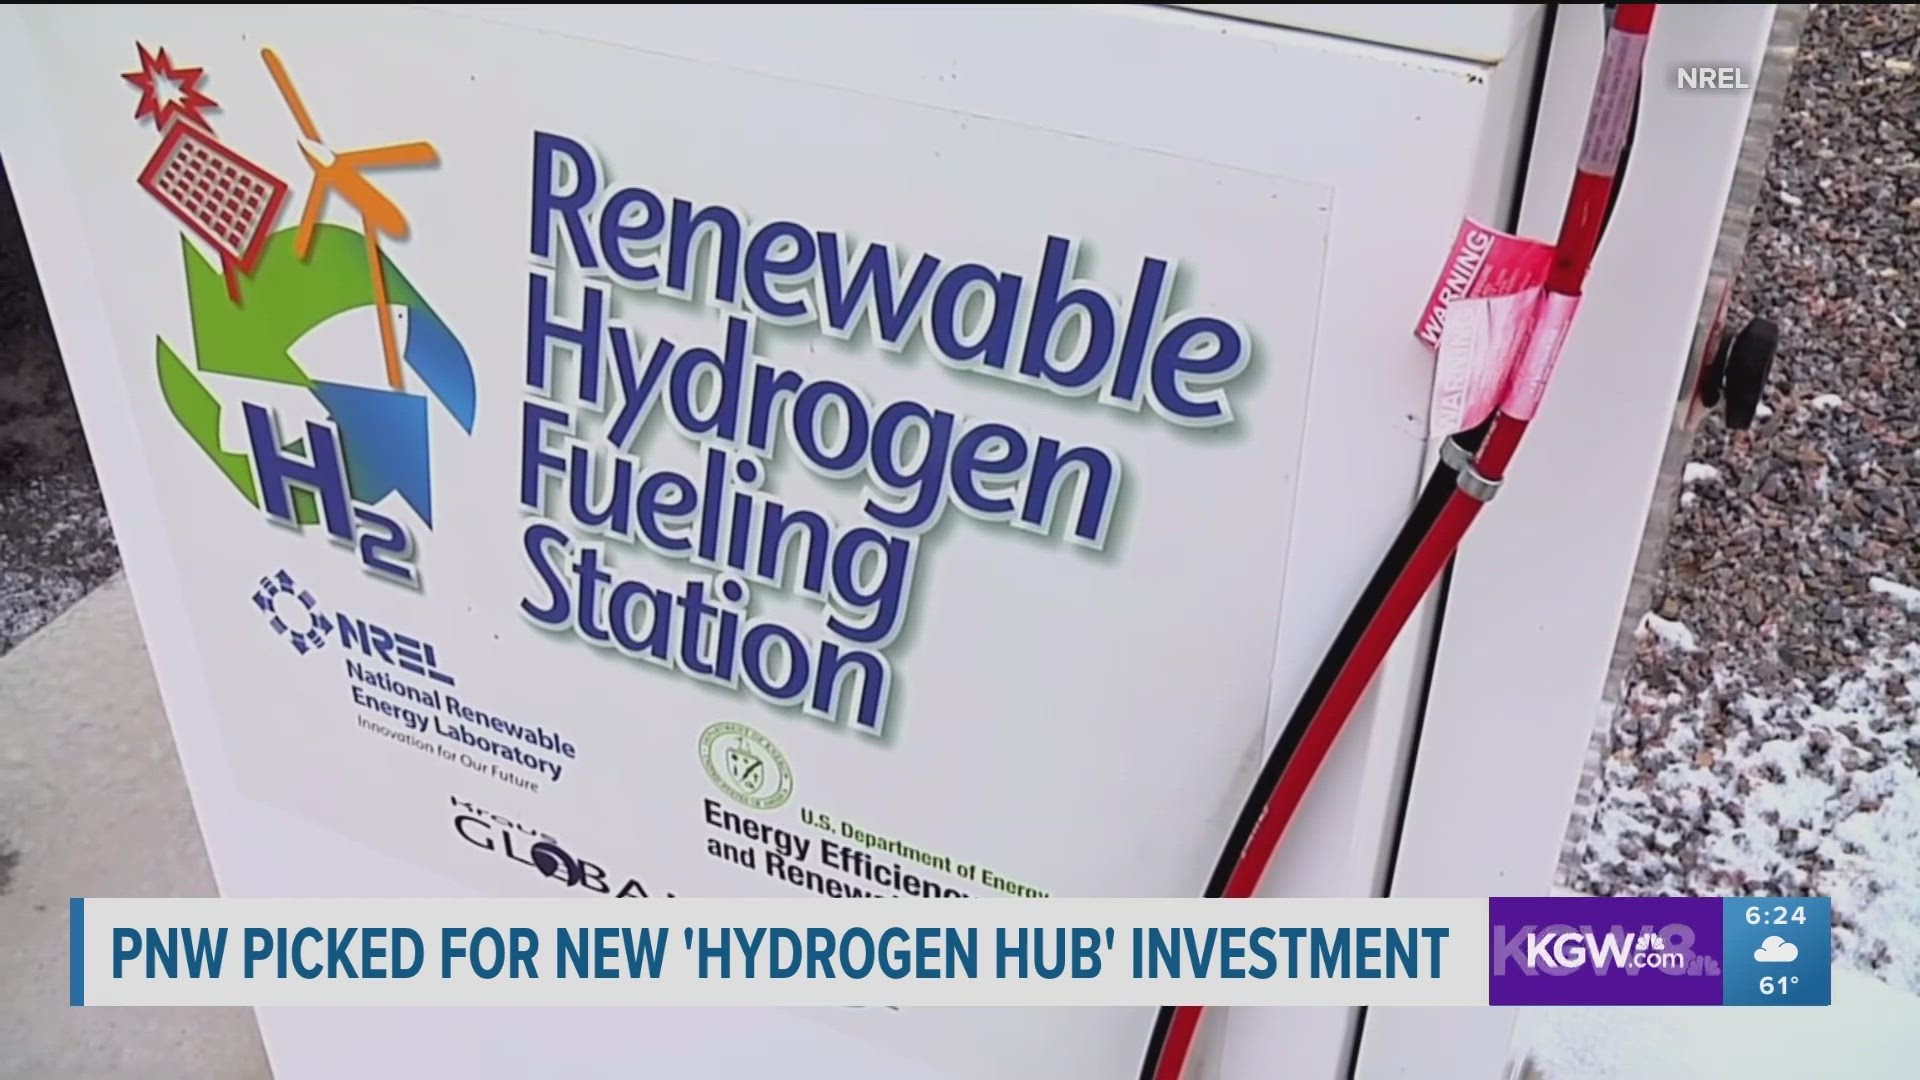 The region will be one of seven sites selected for producing hydrogen fuel more cheaply, hopefully opening the door to a major source of green energy.